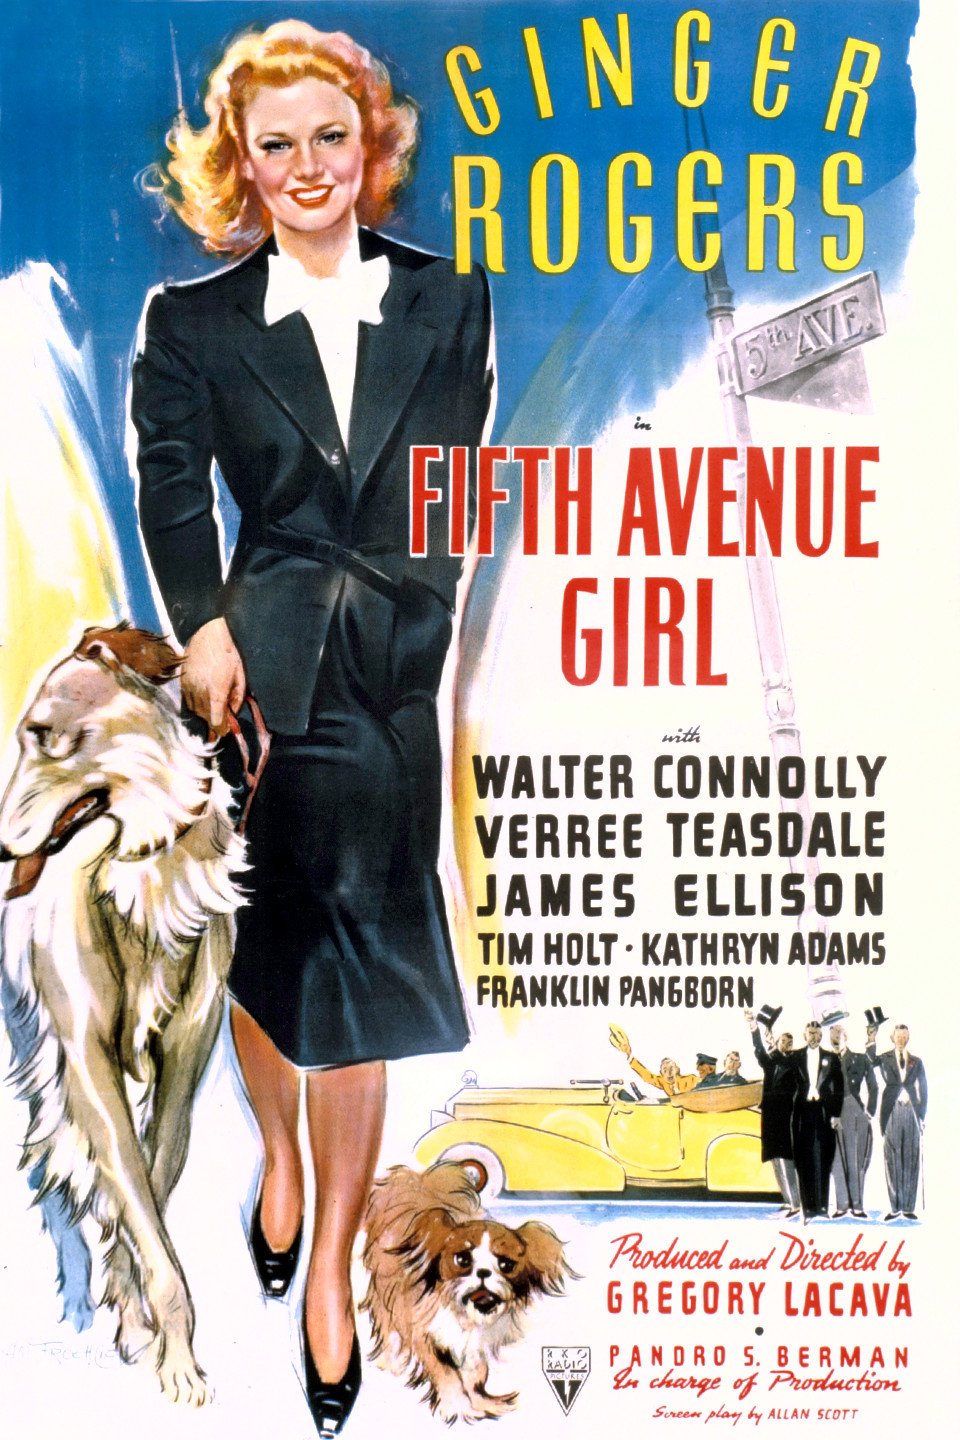 Poster of the movie Fifth Avenue Girl